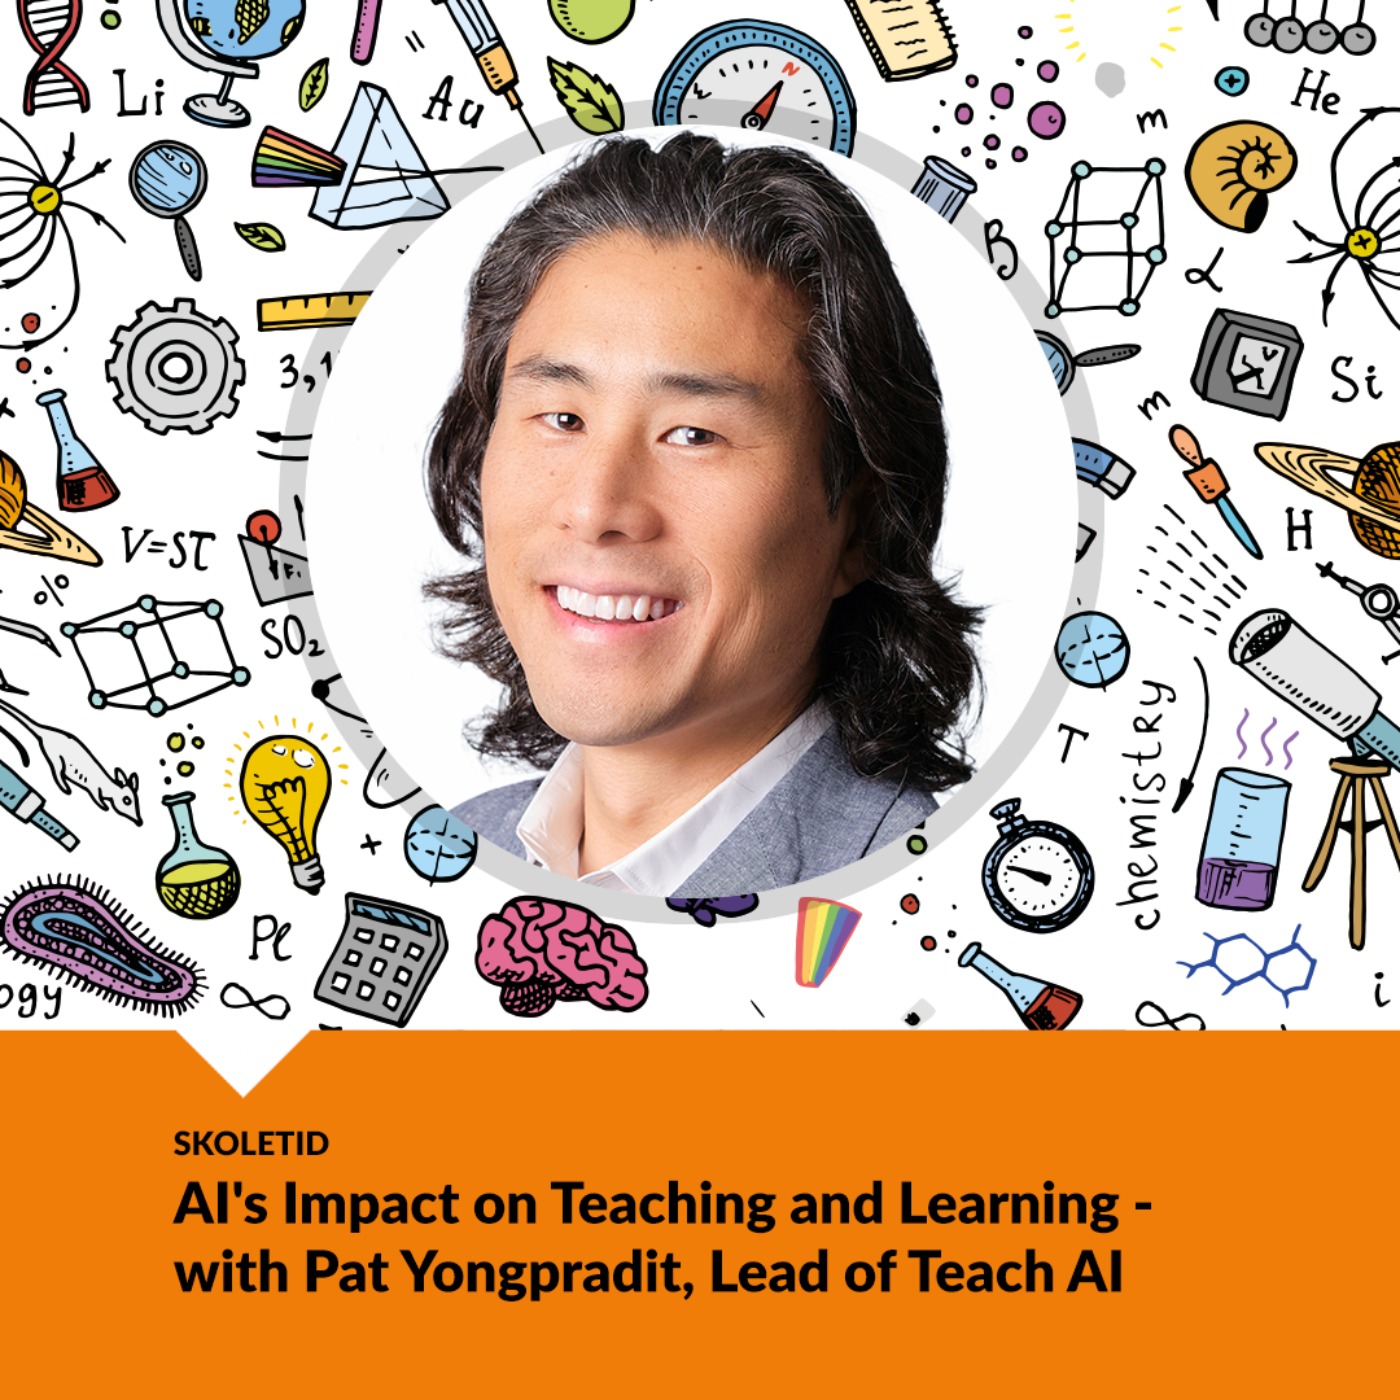 AI's Impact on Teaching and Learning with Pat Yongpradit from TeachAI